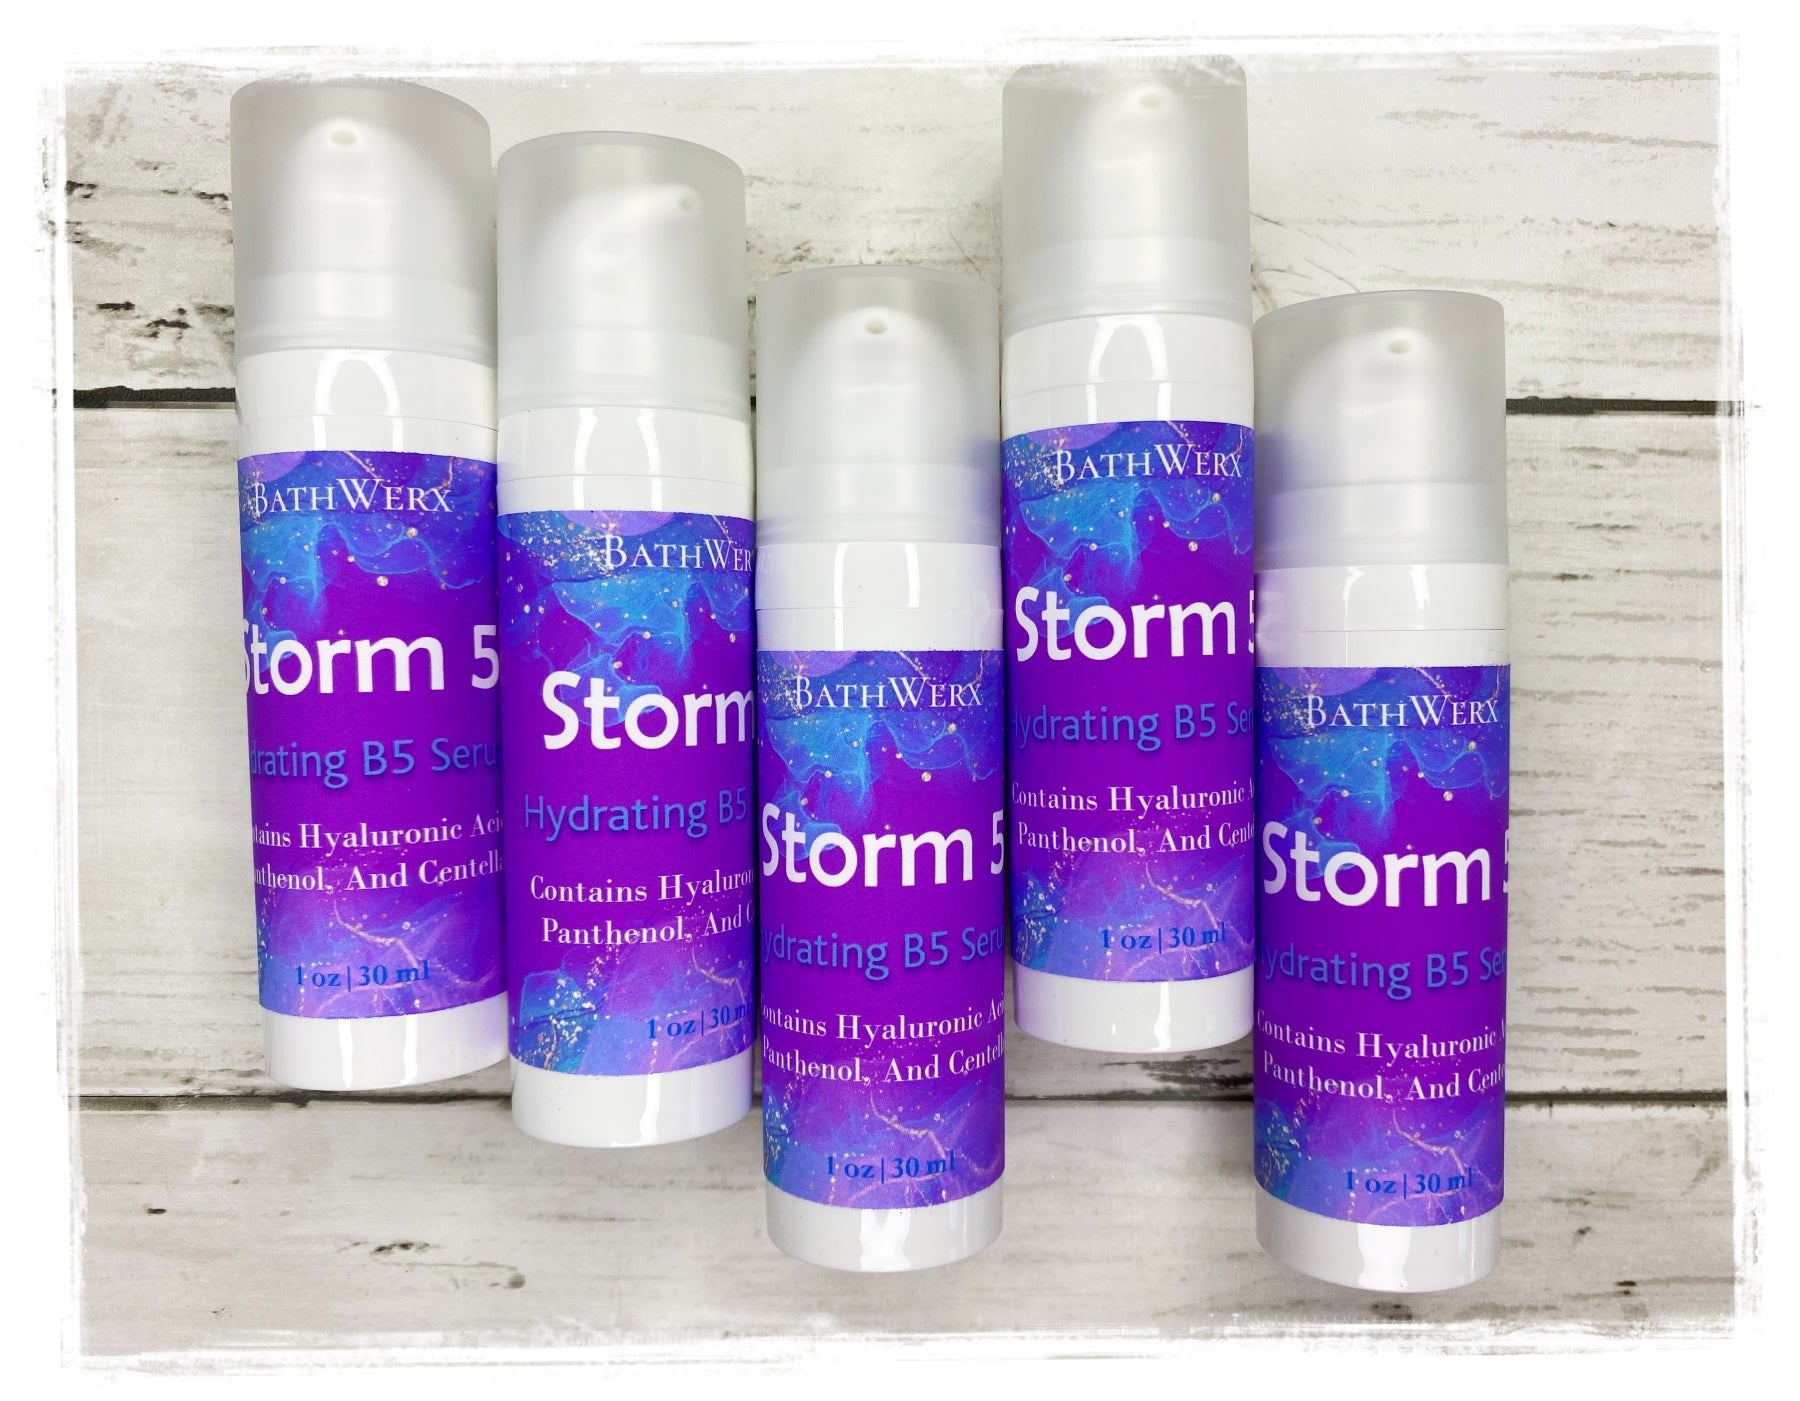 Storm 5: Hydrating B5 Serum with Hyaluronic Acid and Centella